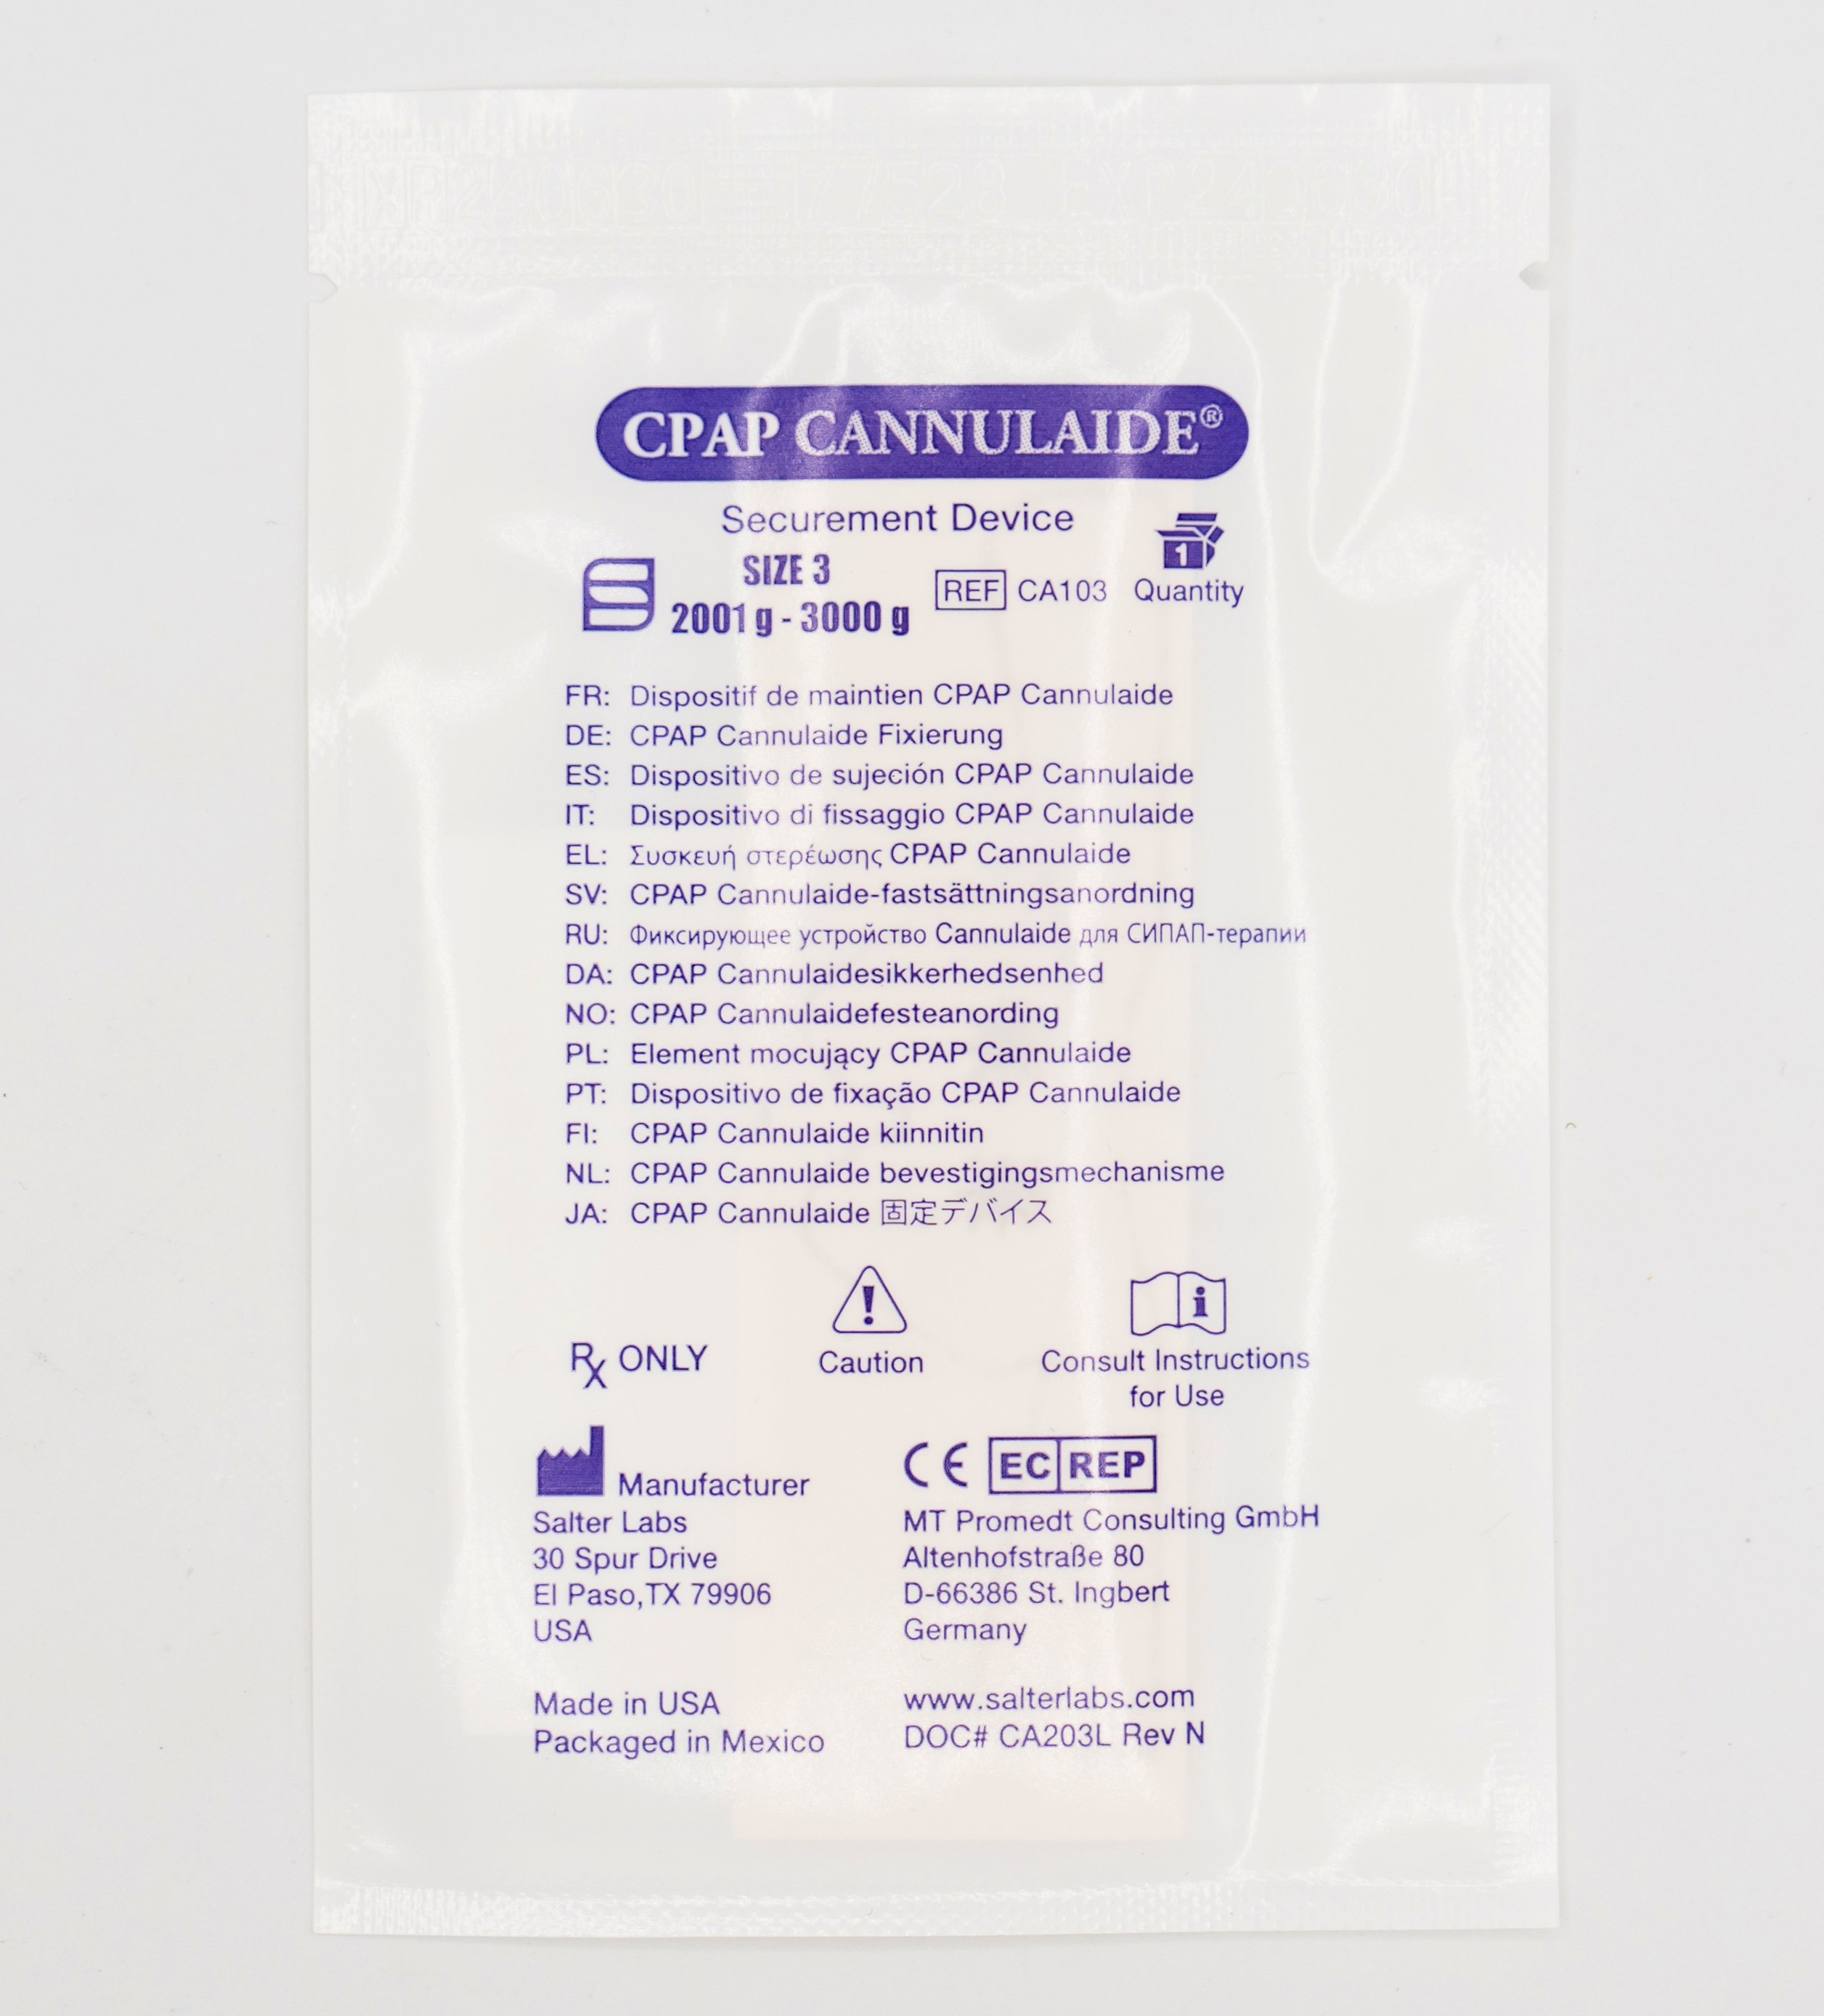 CPAP Cannulaide® Securement Device CA103-0-25 | Size 3, for babies 2001-3000g